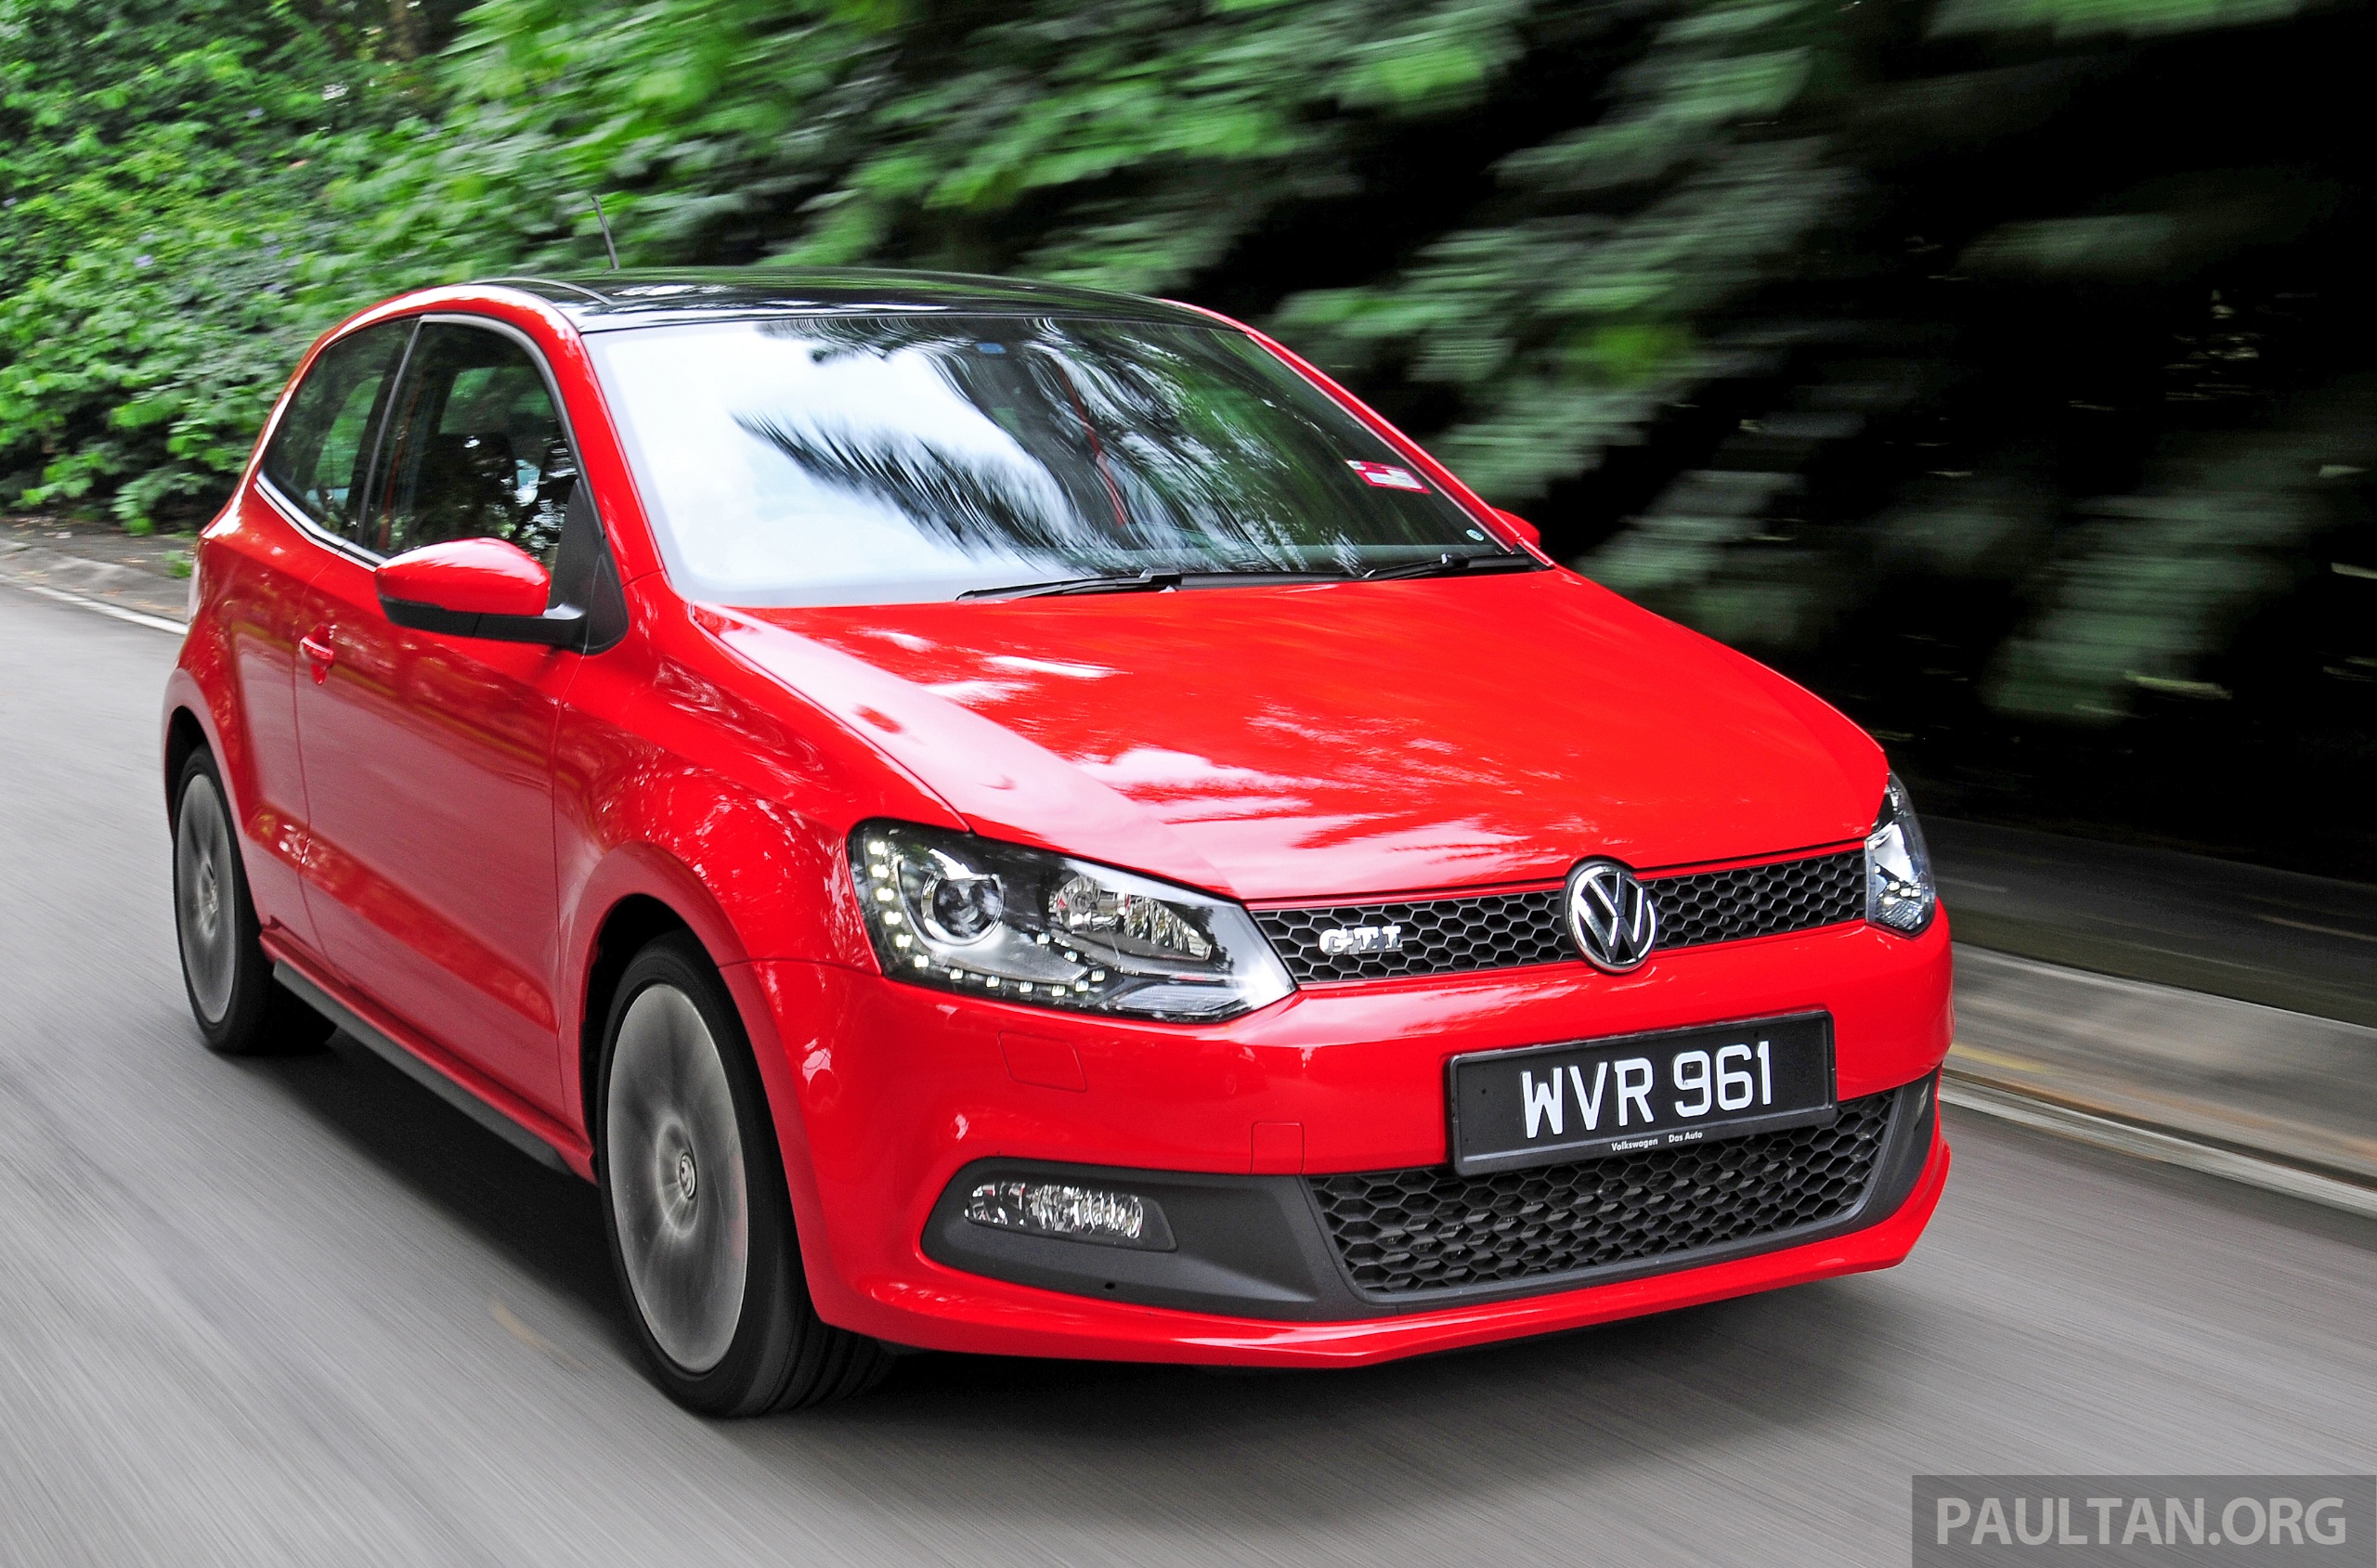 ad-last-batch-of-volkswagen-polo-gtis-set-to-fly-fast-with-rebates-of